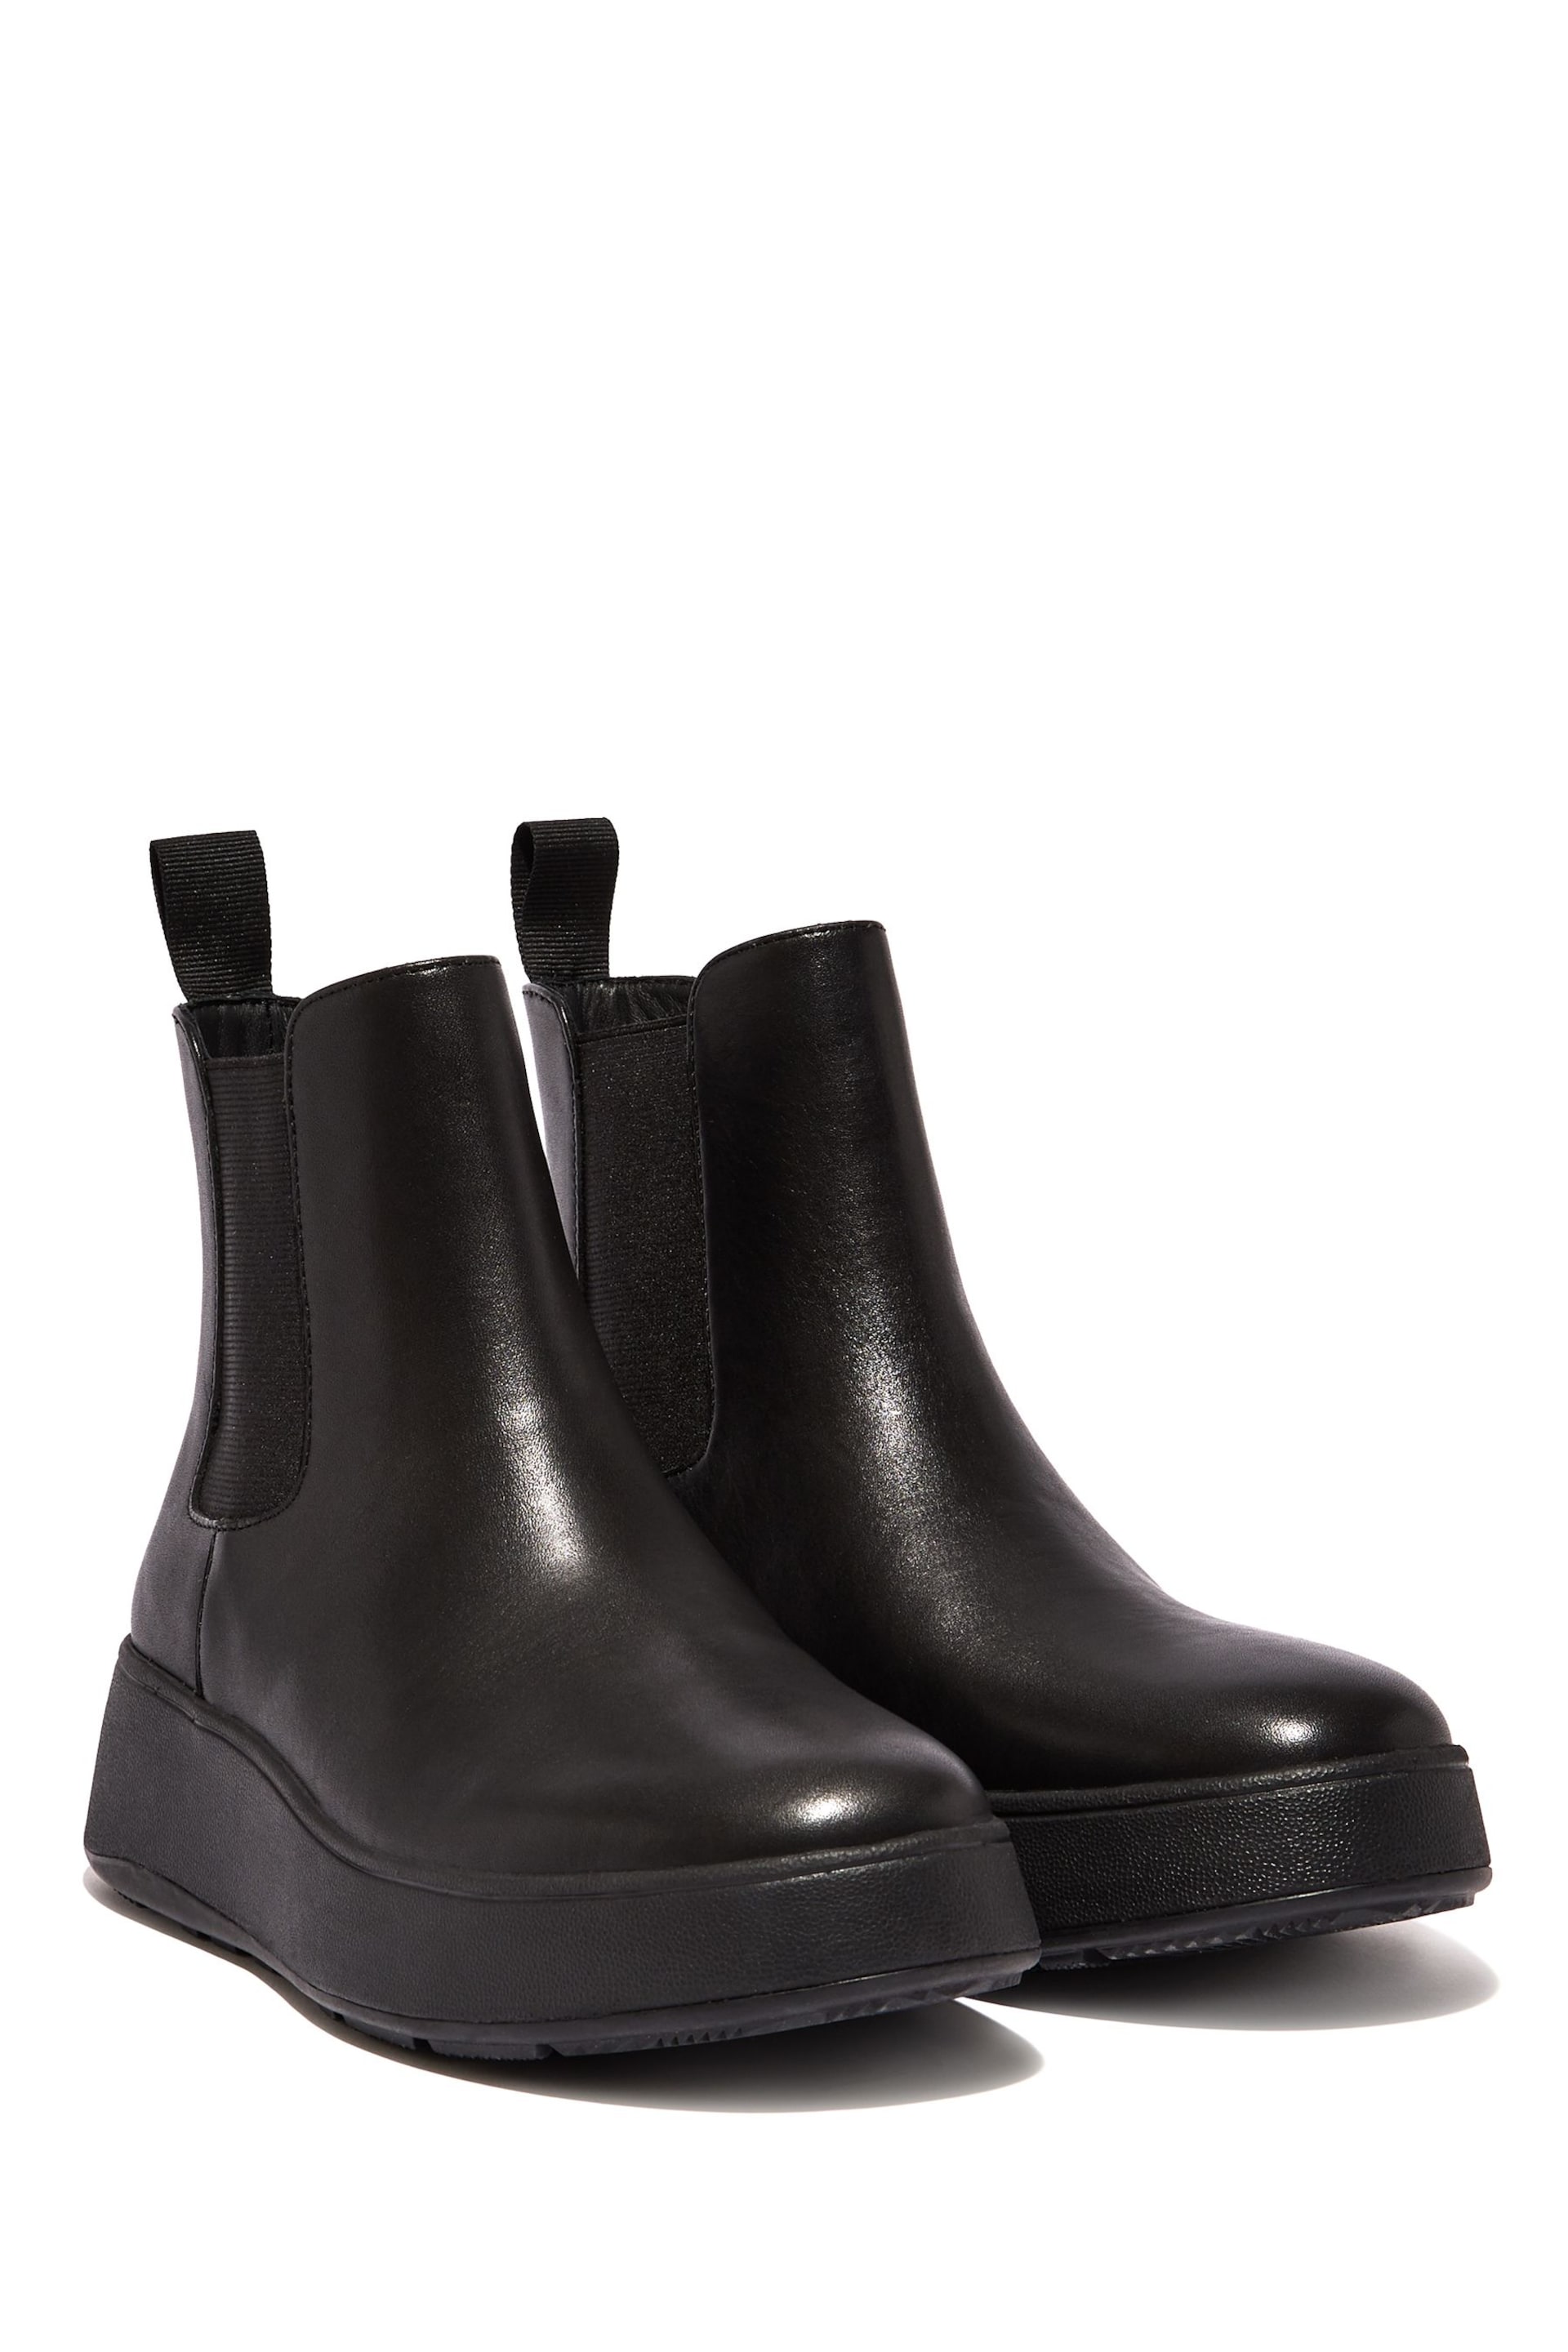 FitFlop F Mode Leather Flatform Chelsea Boots - Image 3 of 7